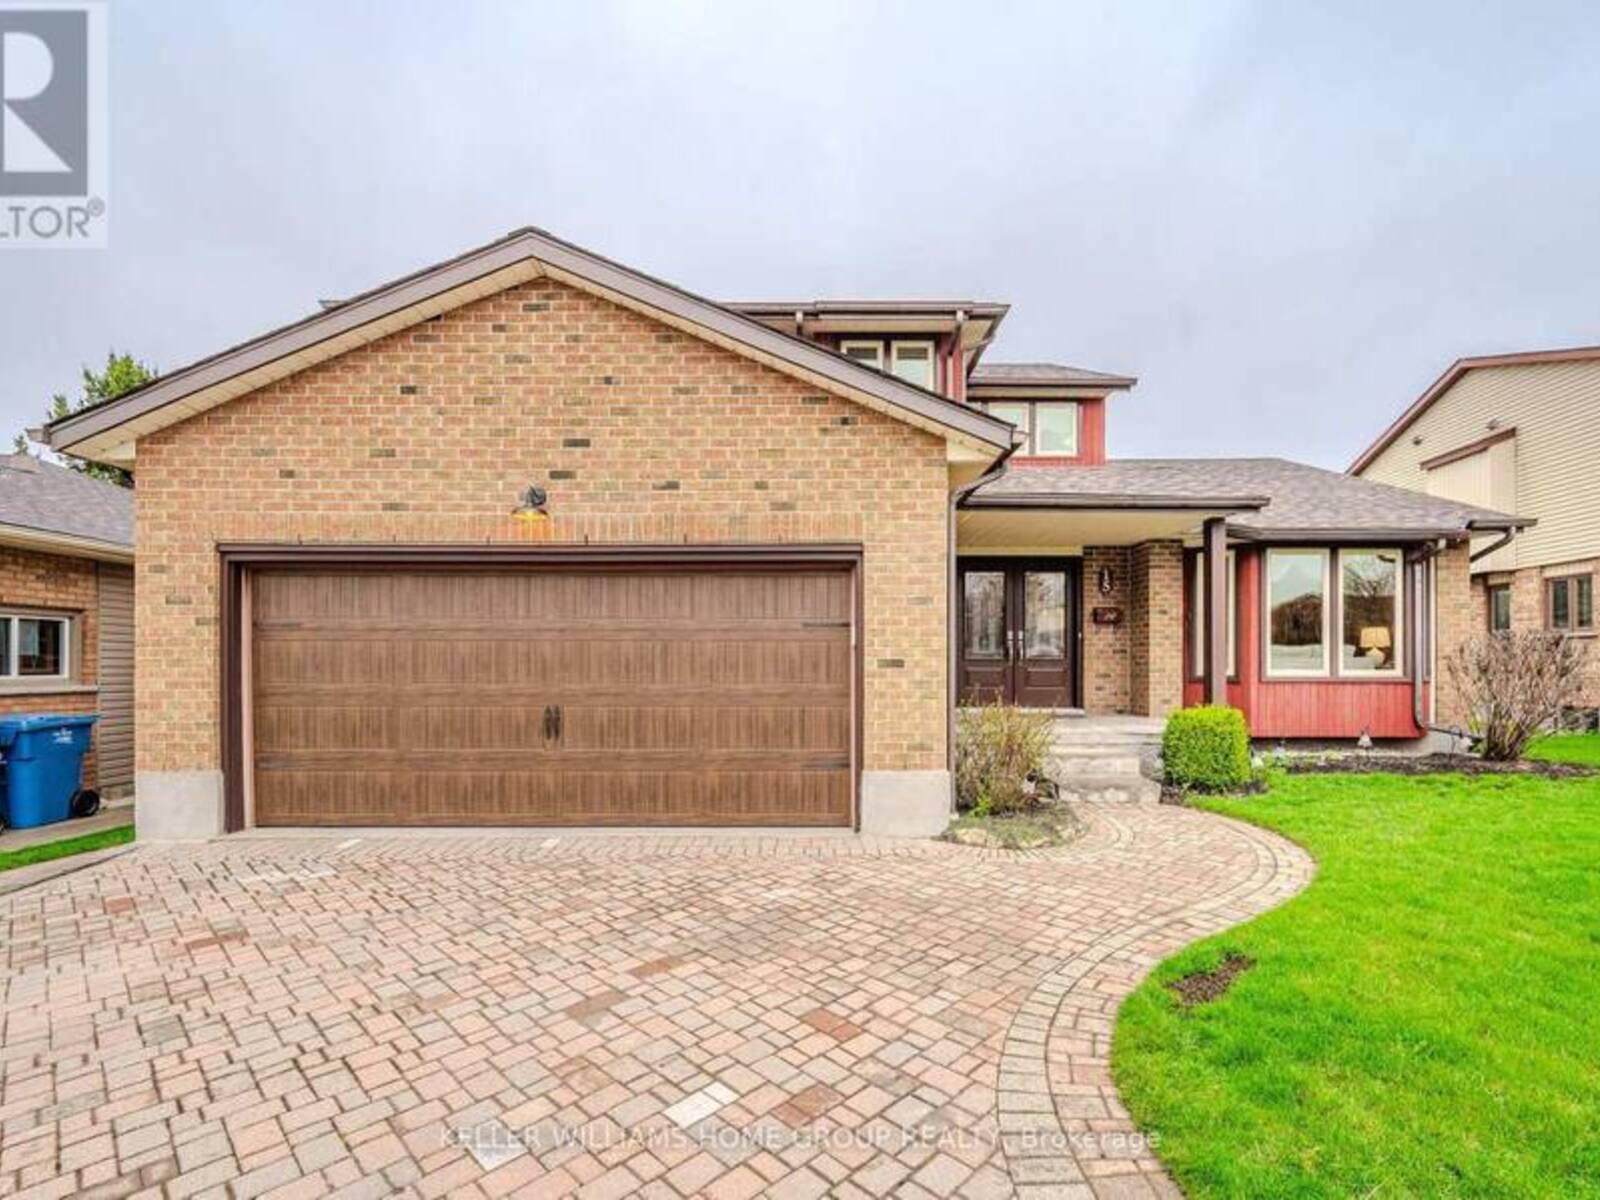 15 WILTSHIRE PL, Guelph, Ontario N1H 8B1